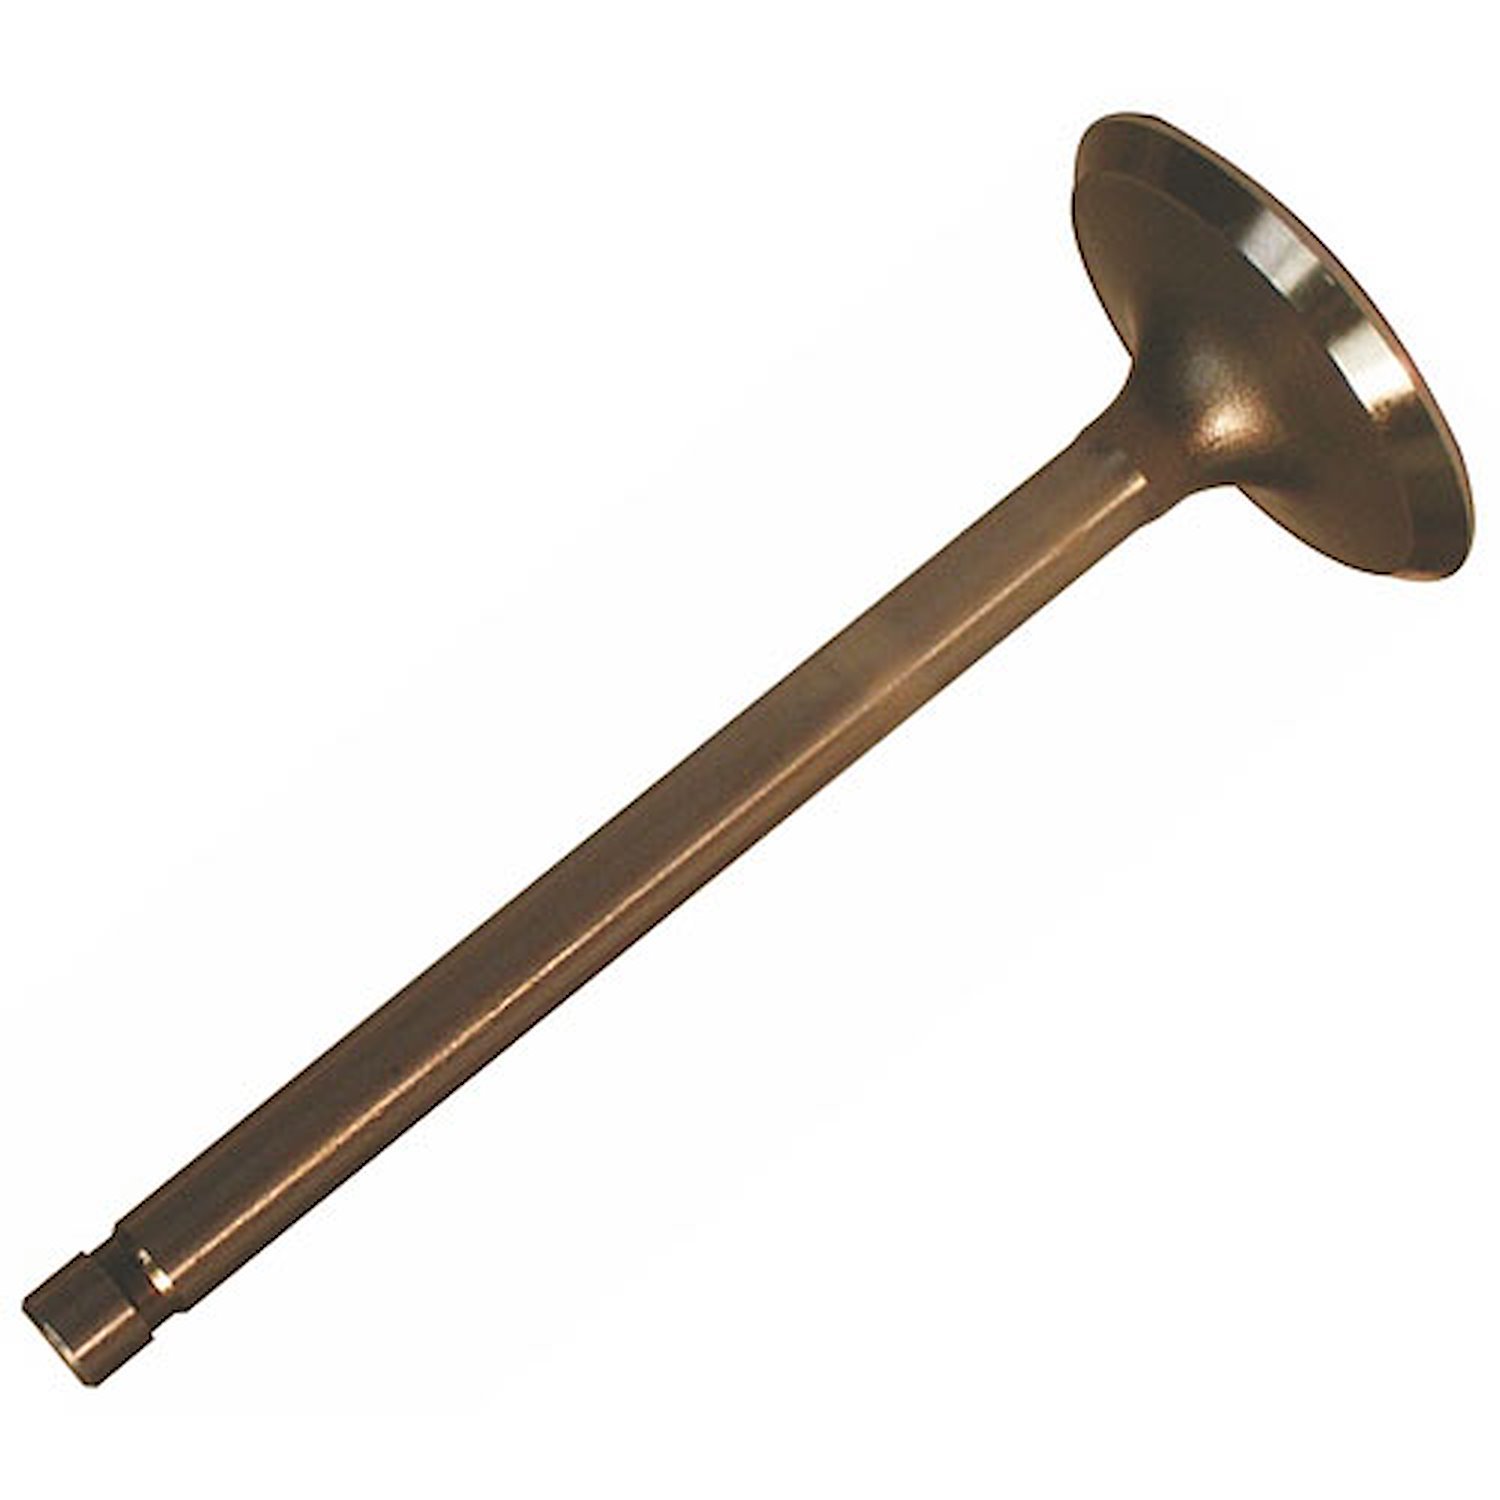 Exhaust Valve 1994-97 Chevy 2.2L 4-Cyl.